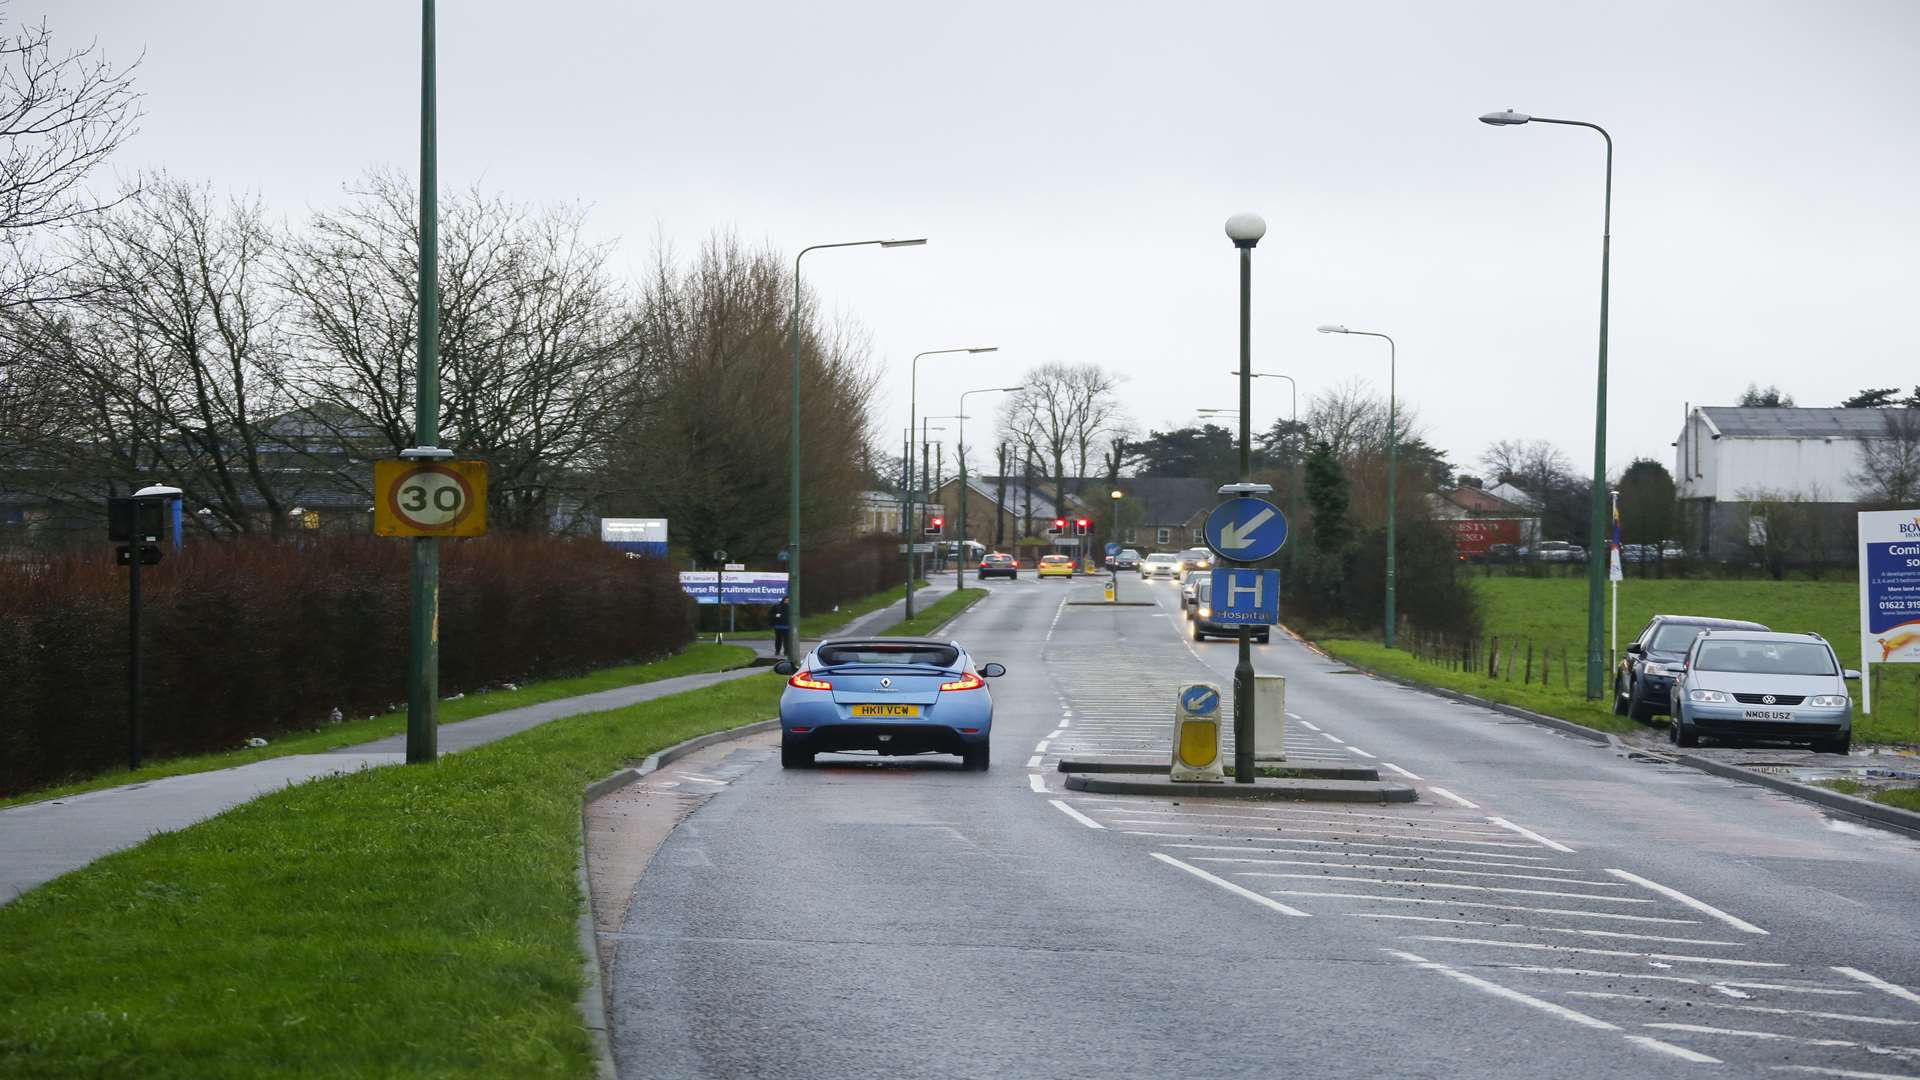 The traffic chaos on Hermitage Lane is set to last for at least five more weeks